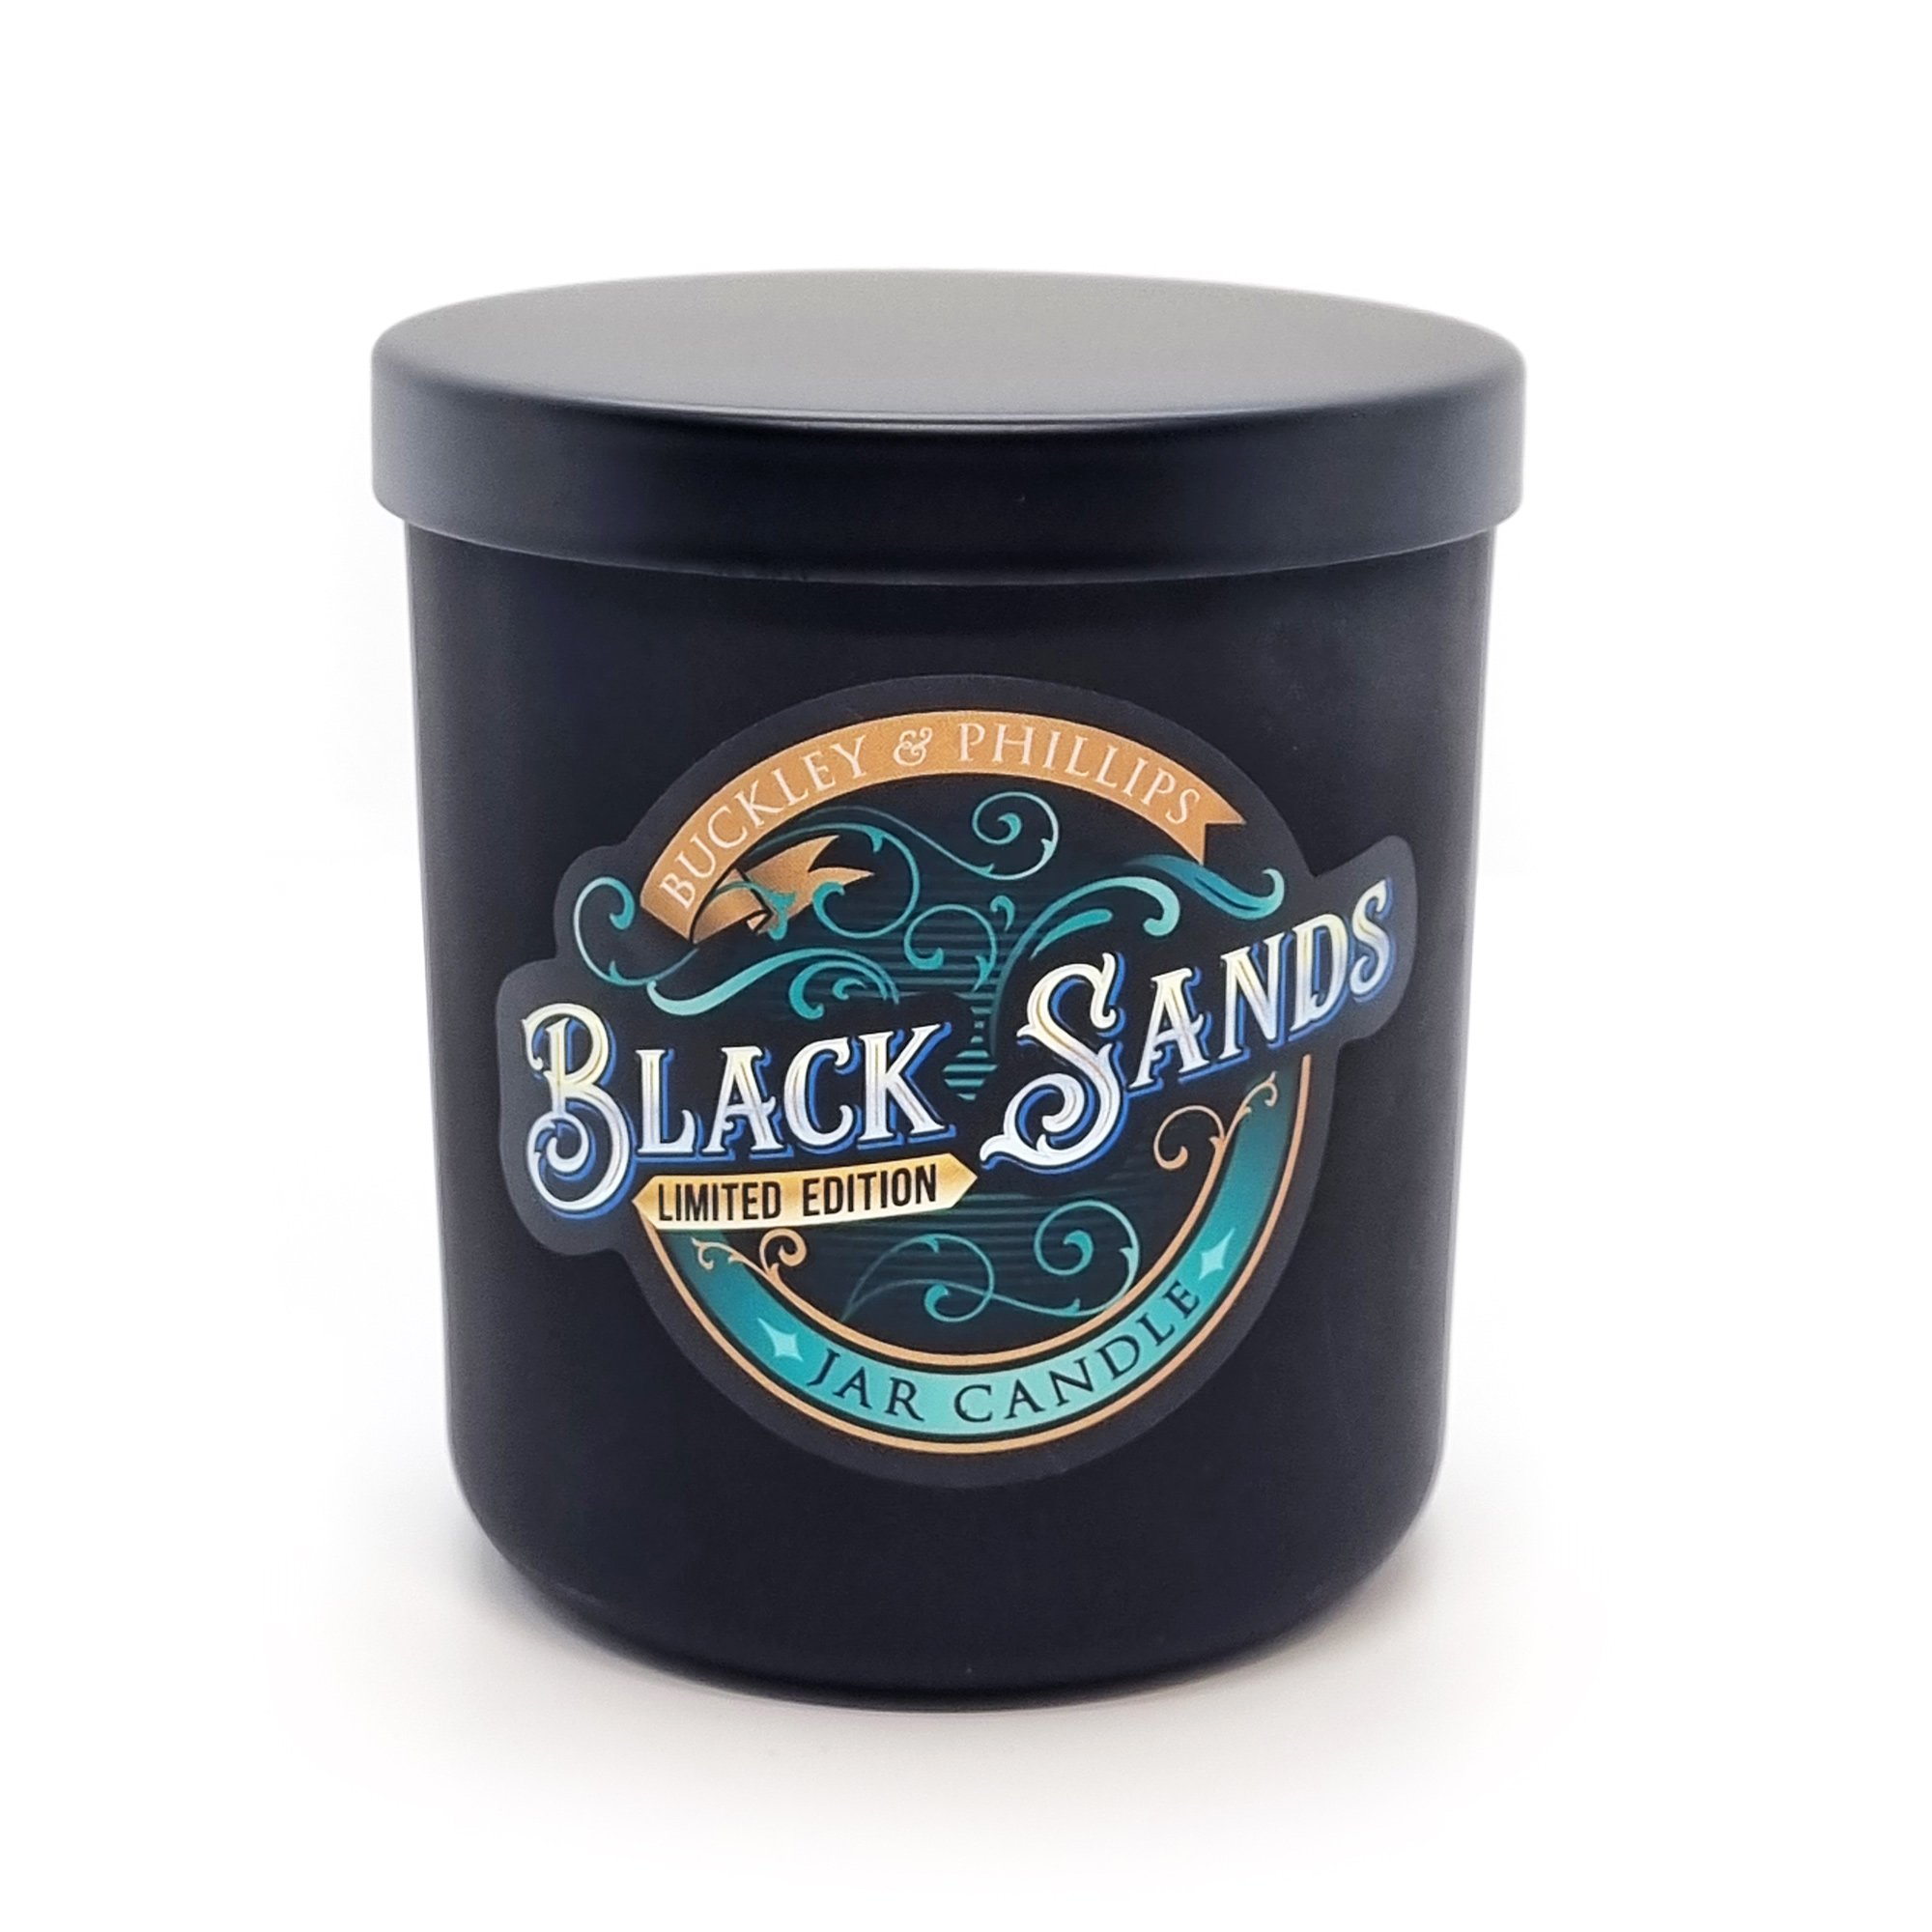 BLACK SANDS LIMITED EDITION SOY CANDLE